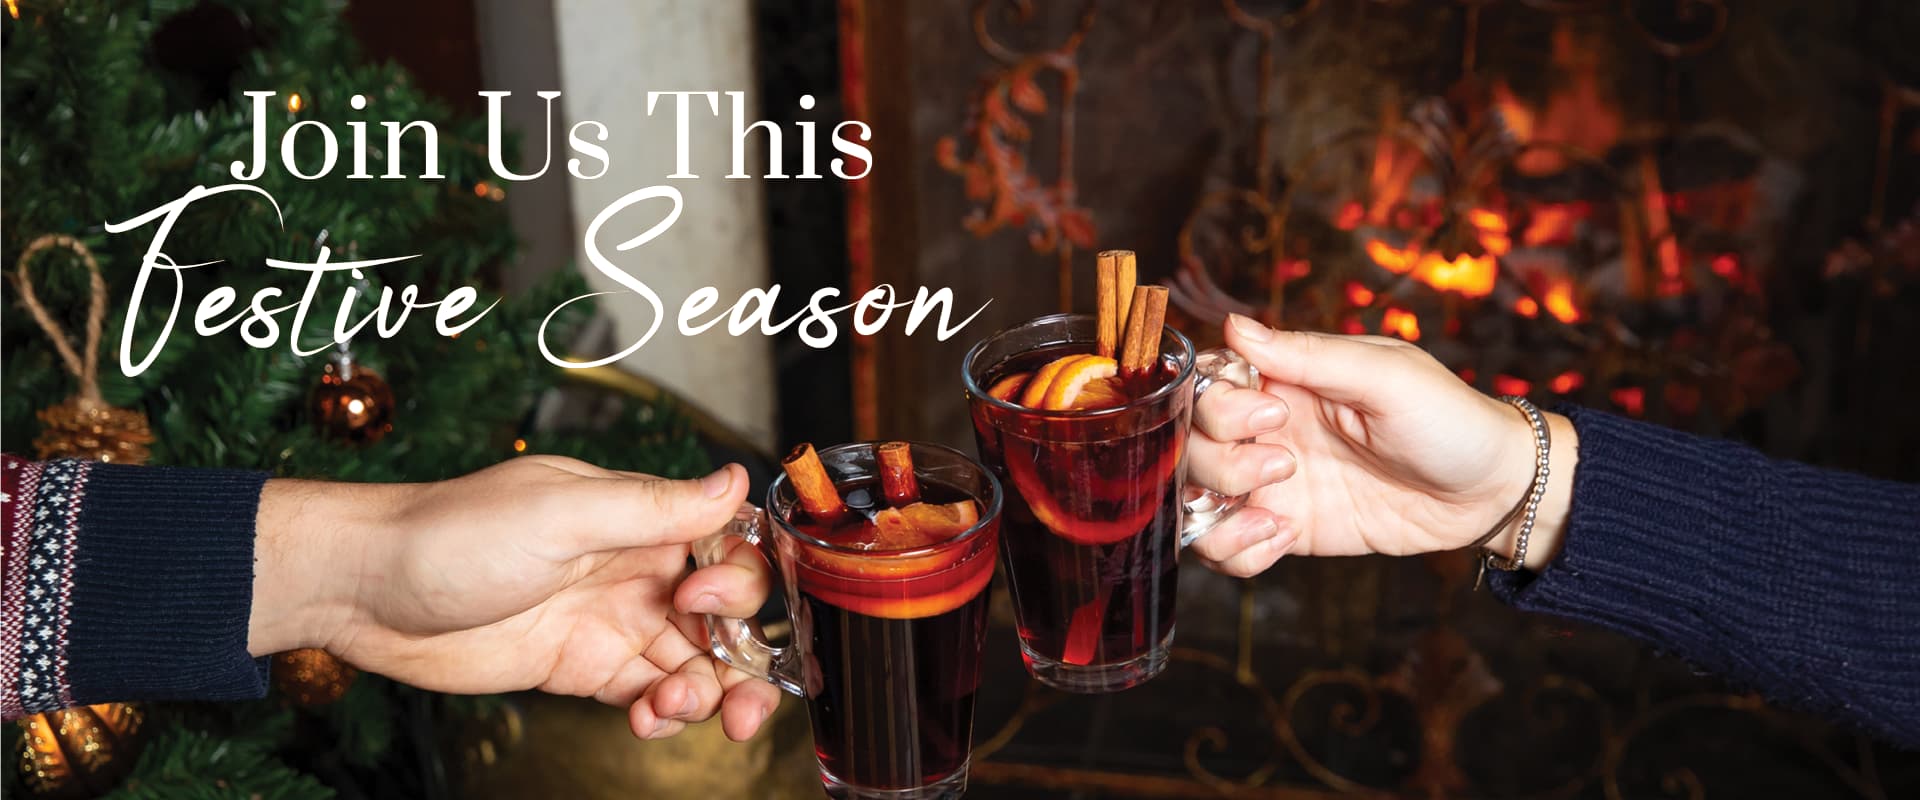 join us this festive season at The White Hart on the Green | Mulled Wine